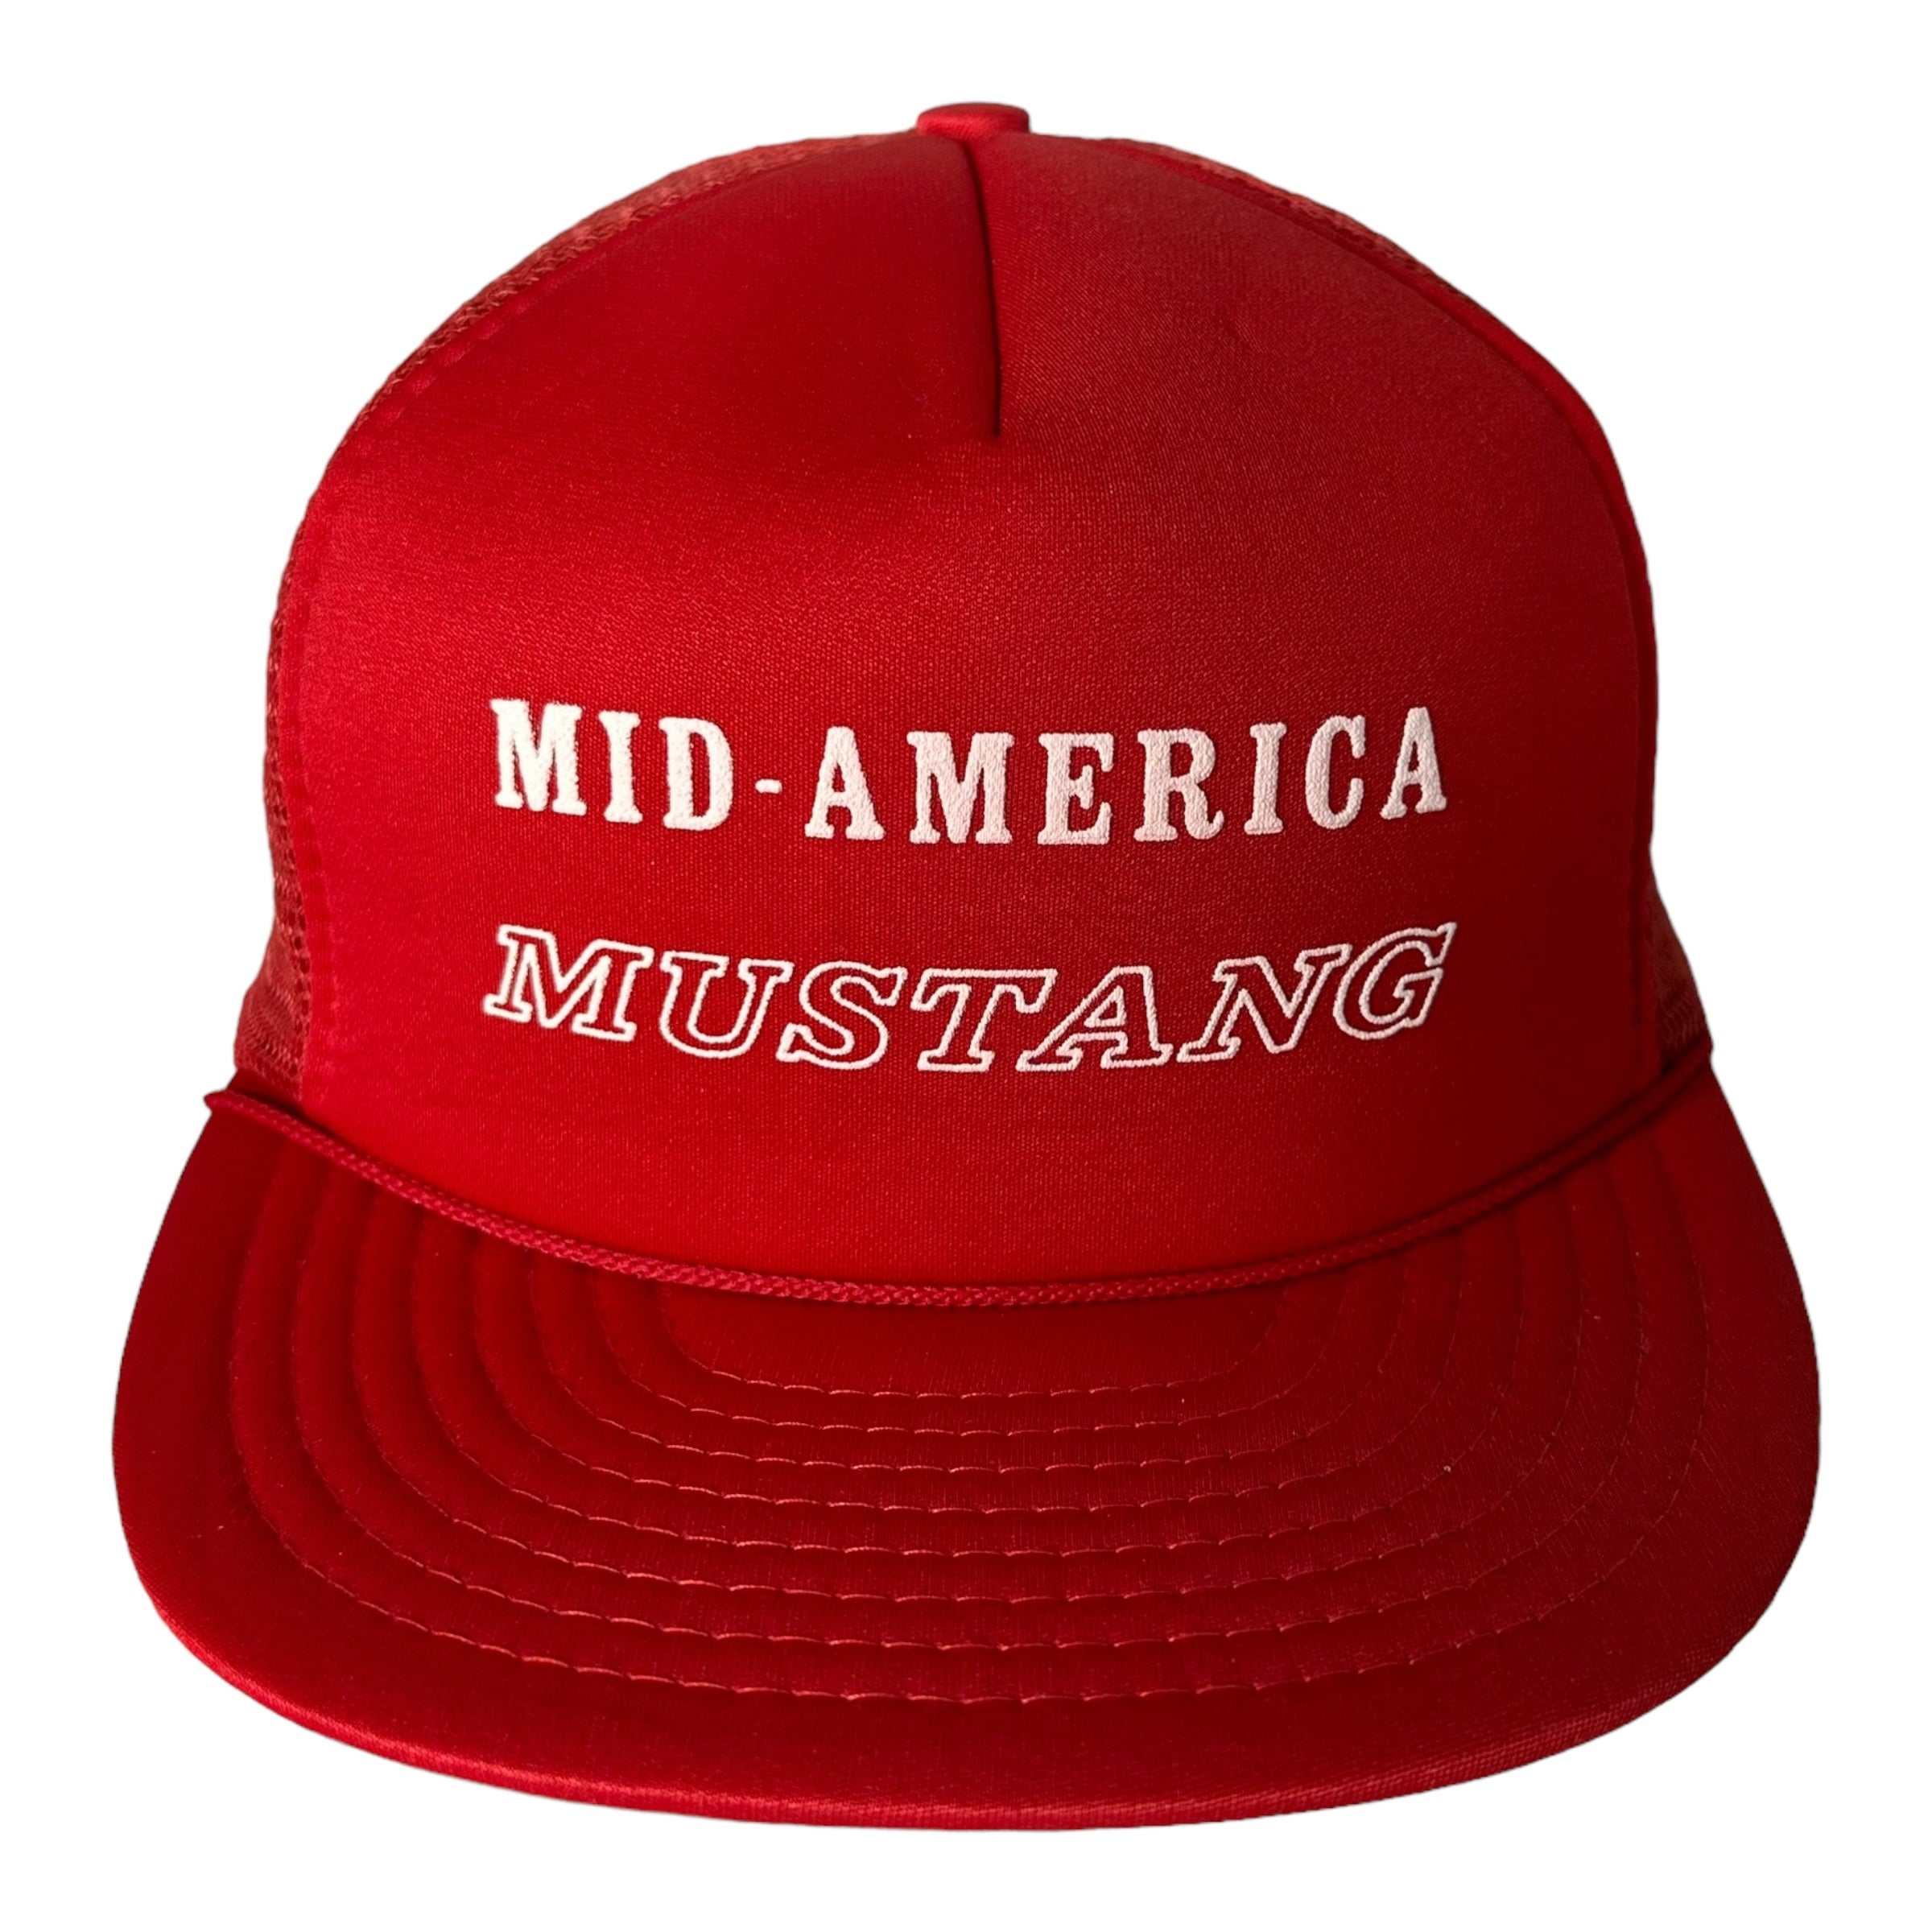 Vintage Mustang Rope Lace Trucker Snapback 90s